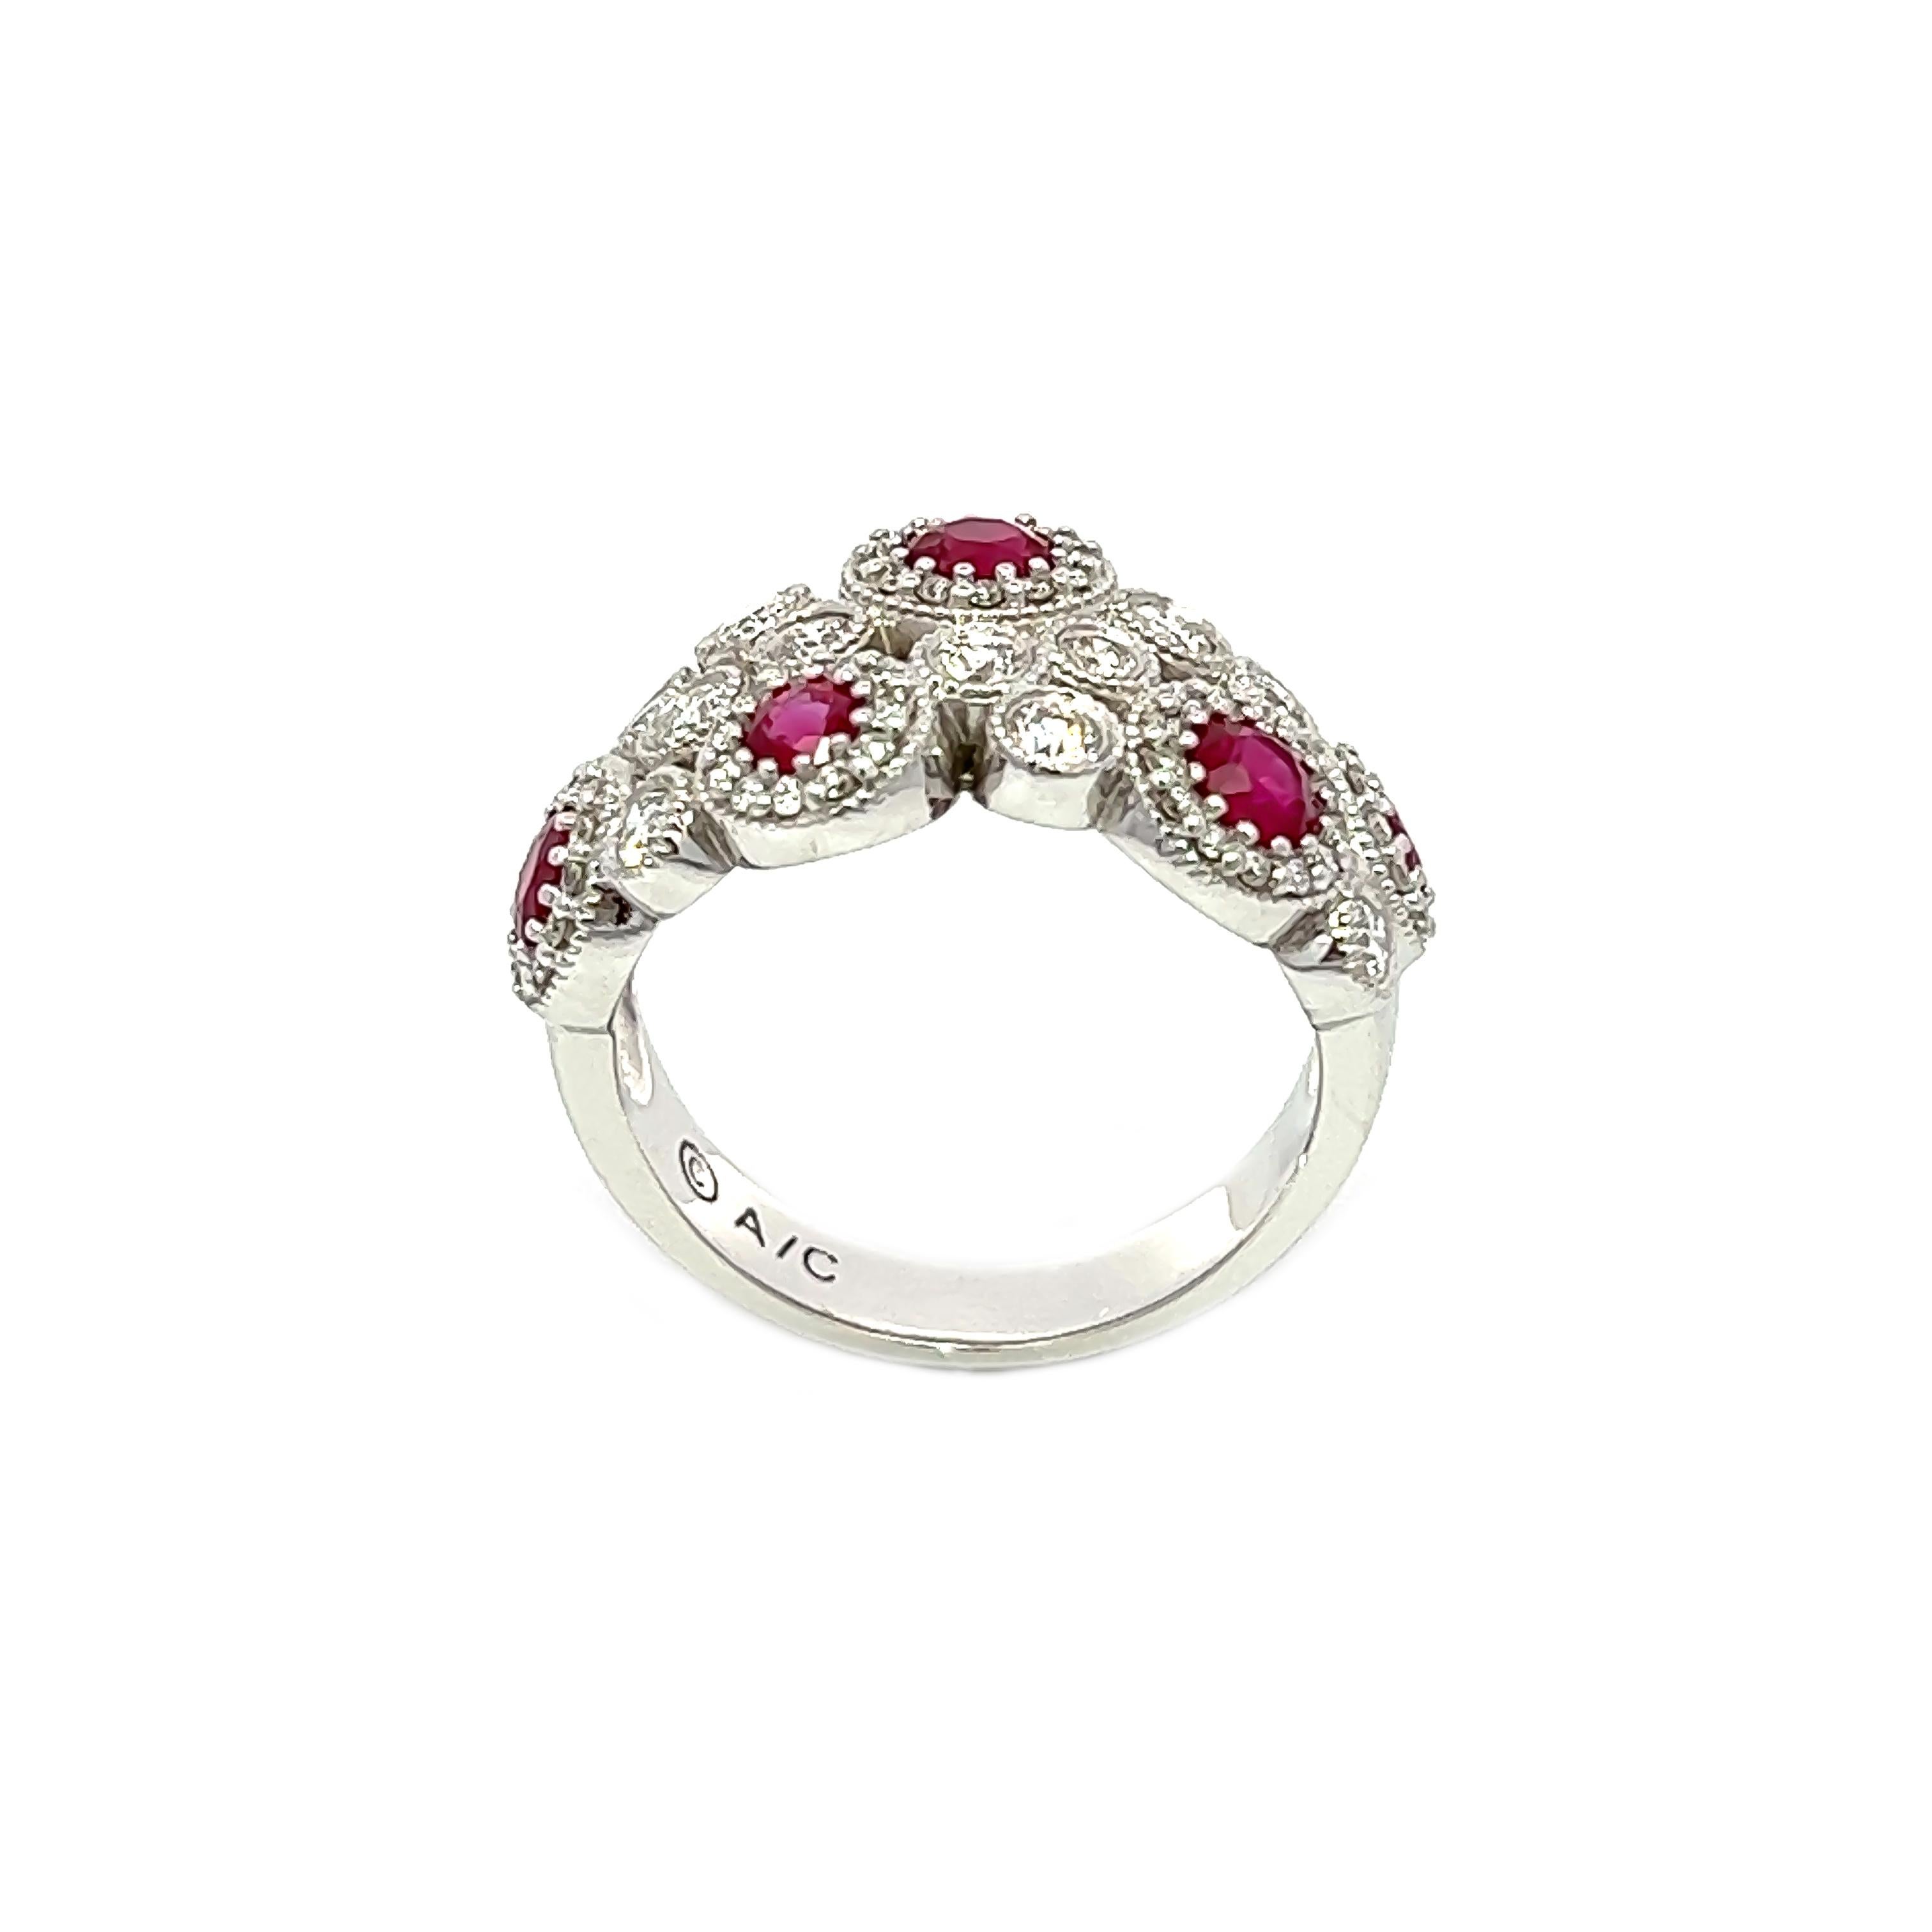 This exquisite piece of jewelry showcases six stunning Ruby Stones weighing 1.06ct, elegantly complemented by 0.81ct of Round Brilliant Diamonds. Crafted from 18k white gold, this ring is a true masterpiece that will make a lasting impression.